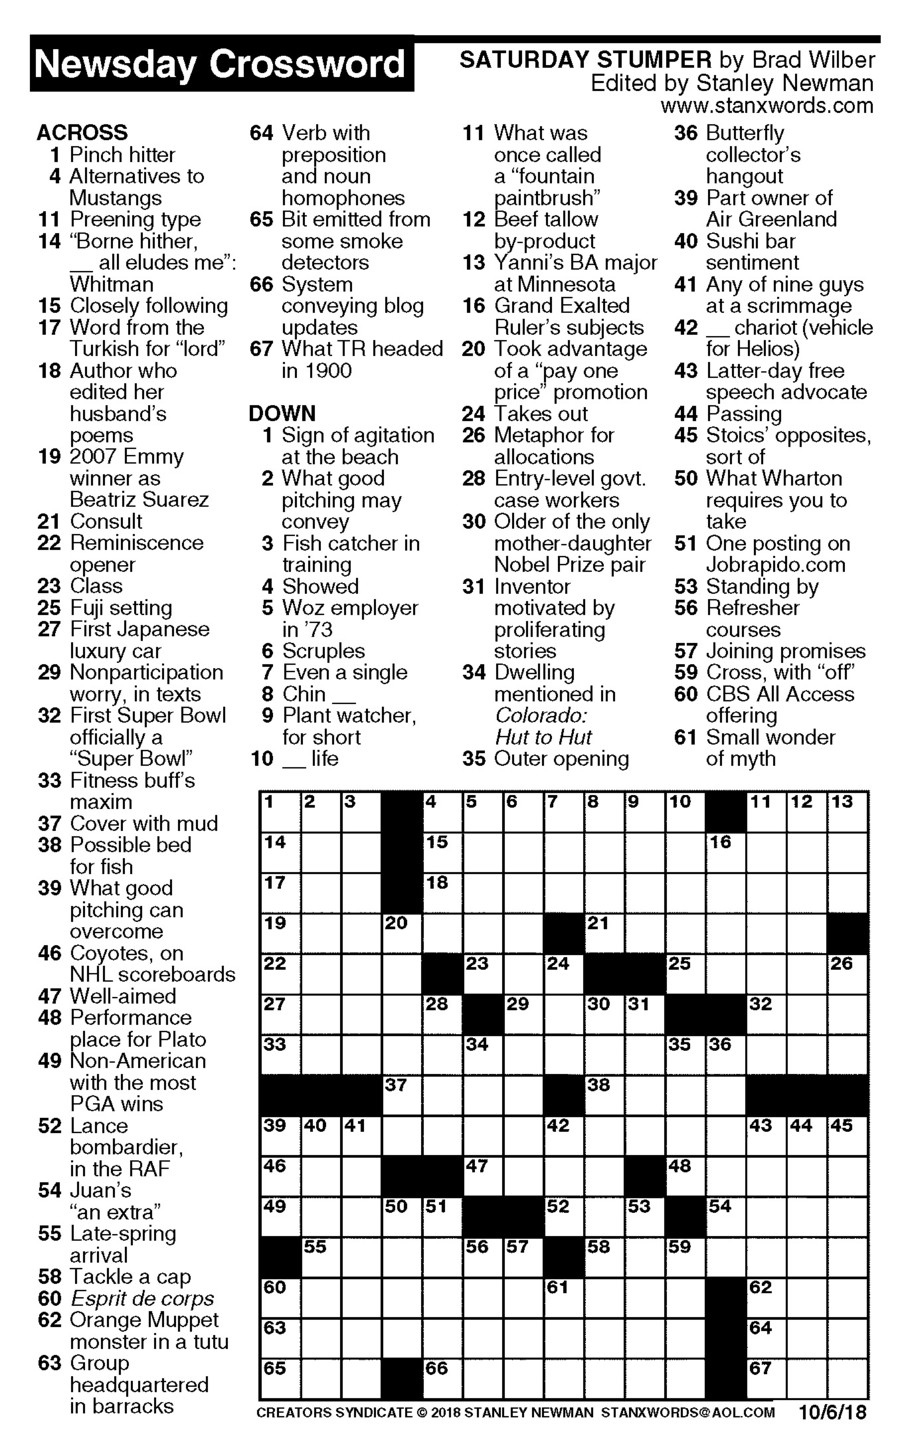 Newsday Crossword Puzzle For Oct 06 2018 By Stanley Newman Creators 